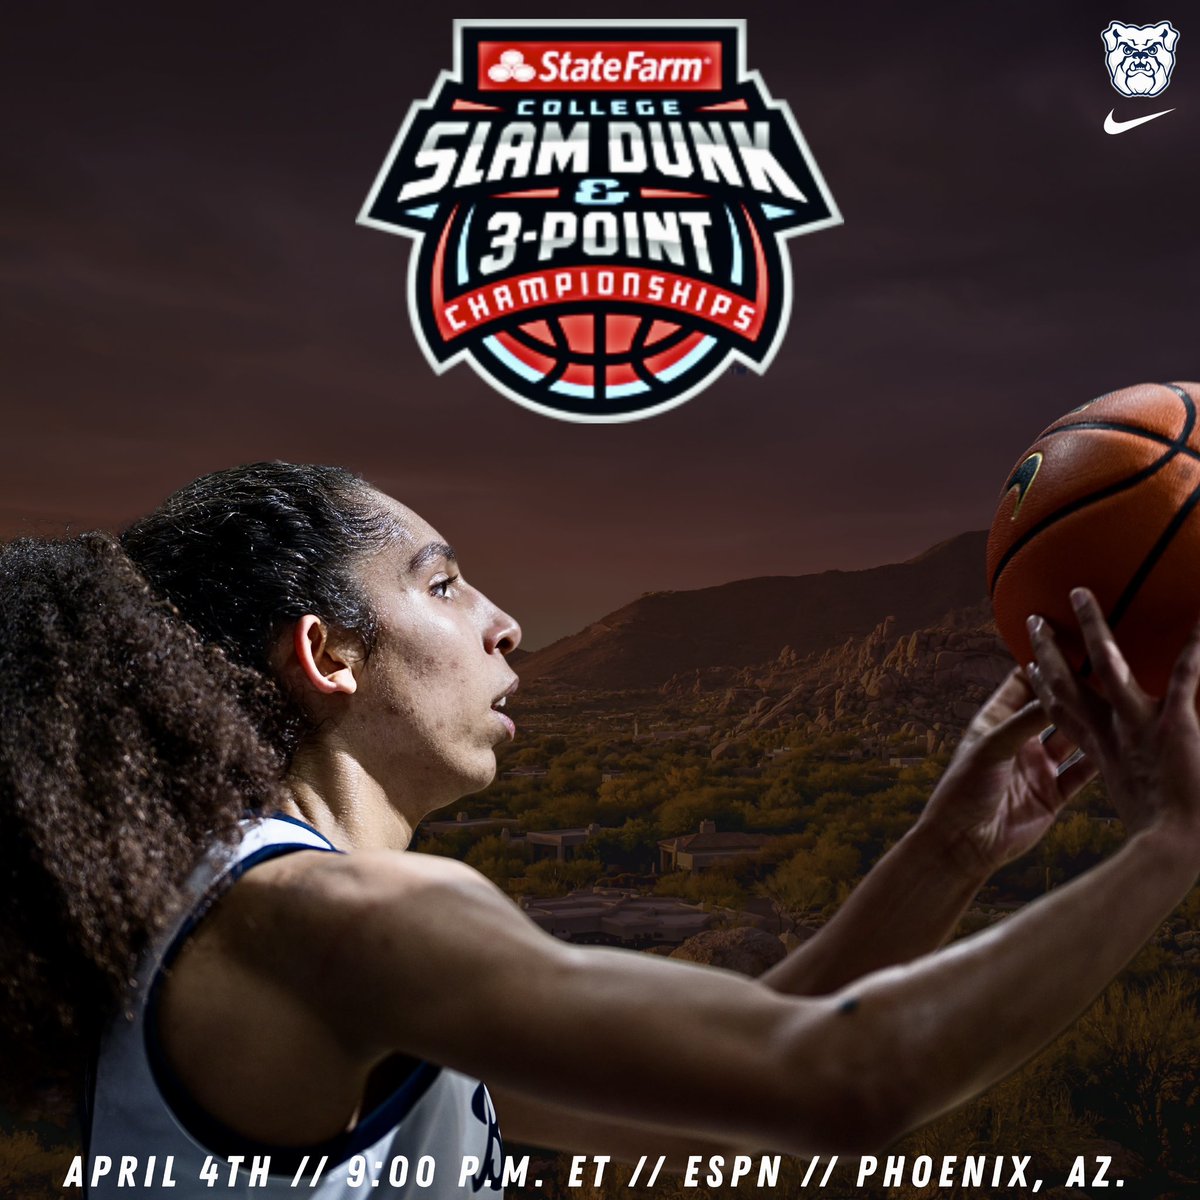 Tune in TONIGHT @ 9:00pm ET as @RachelK33443336 competes in the State Farm 3-Point Championships on ESPN. #4us